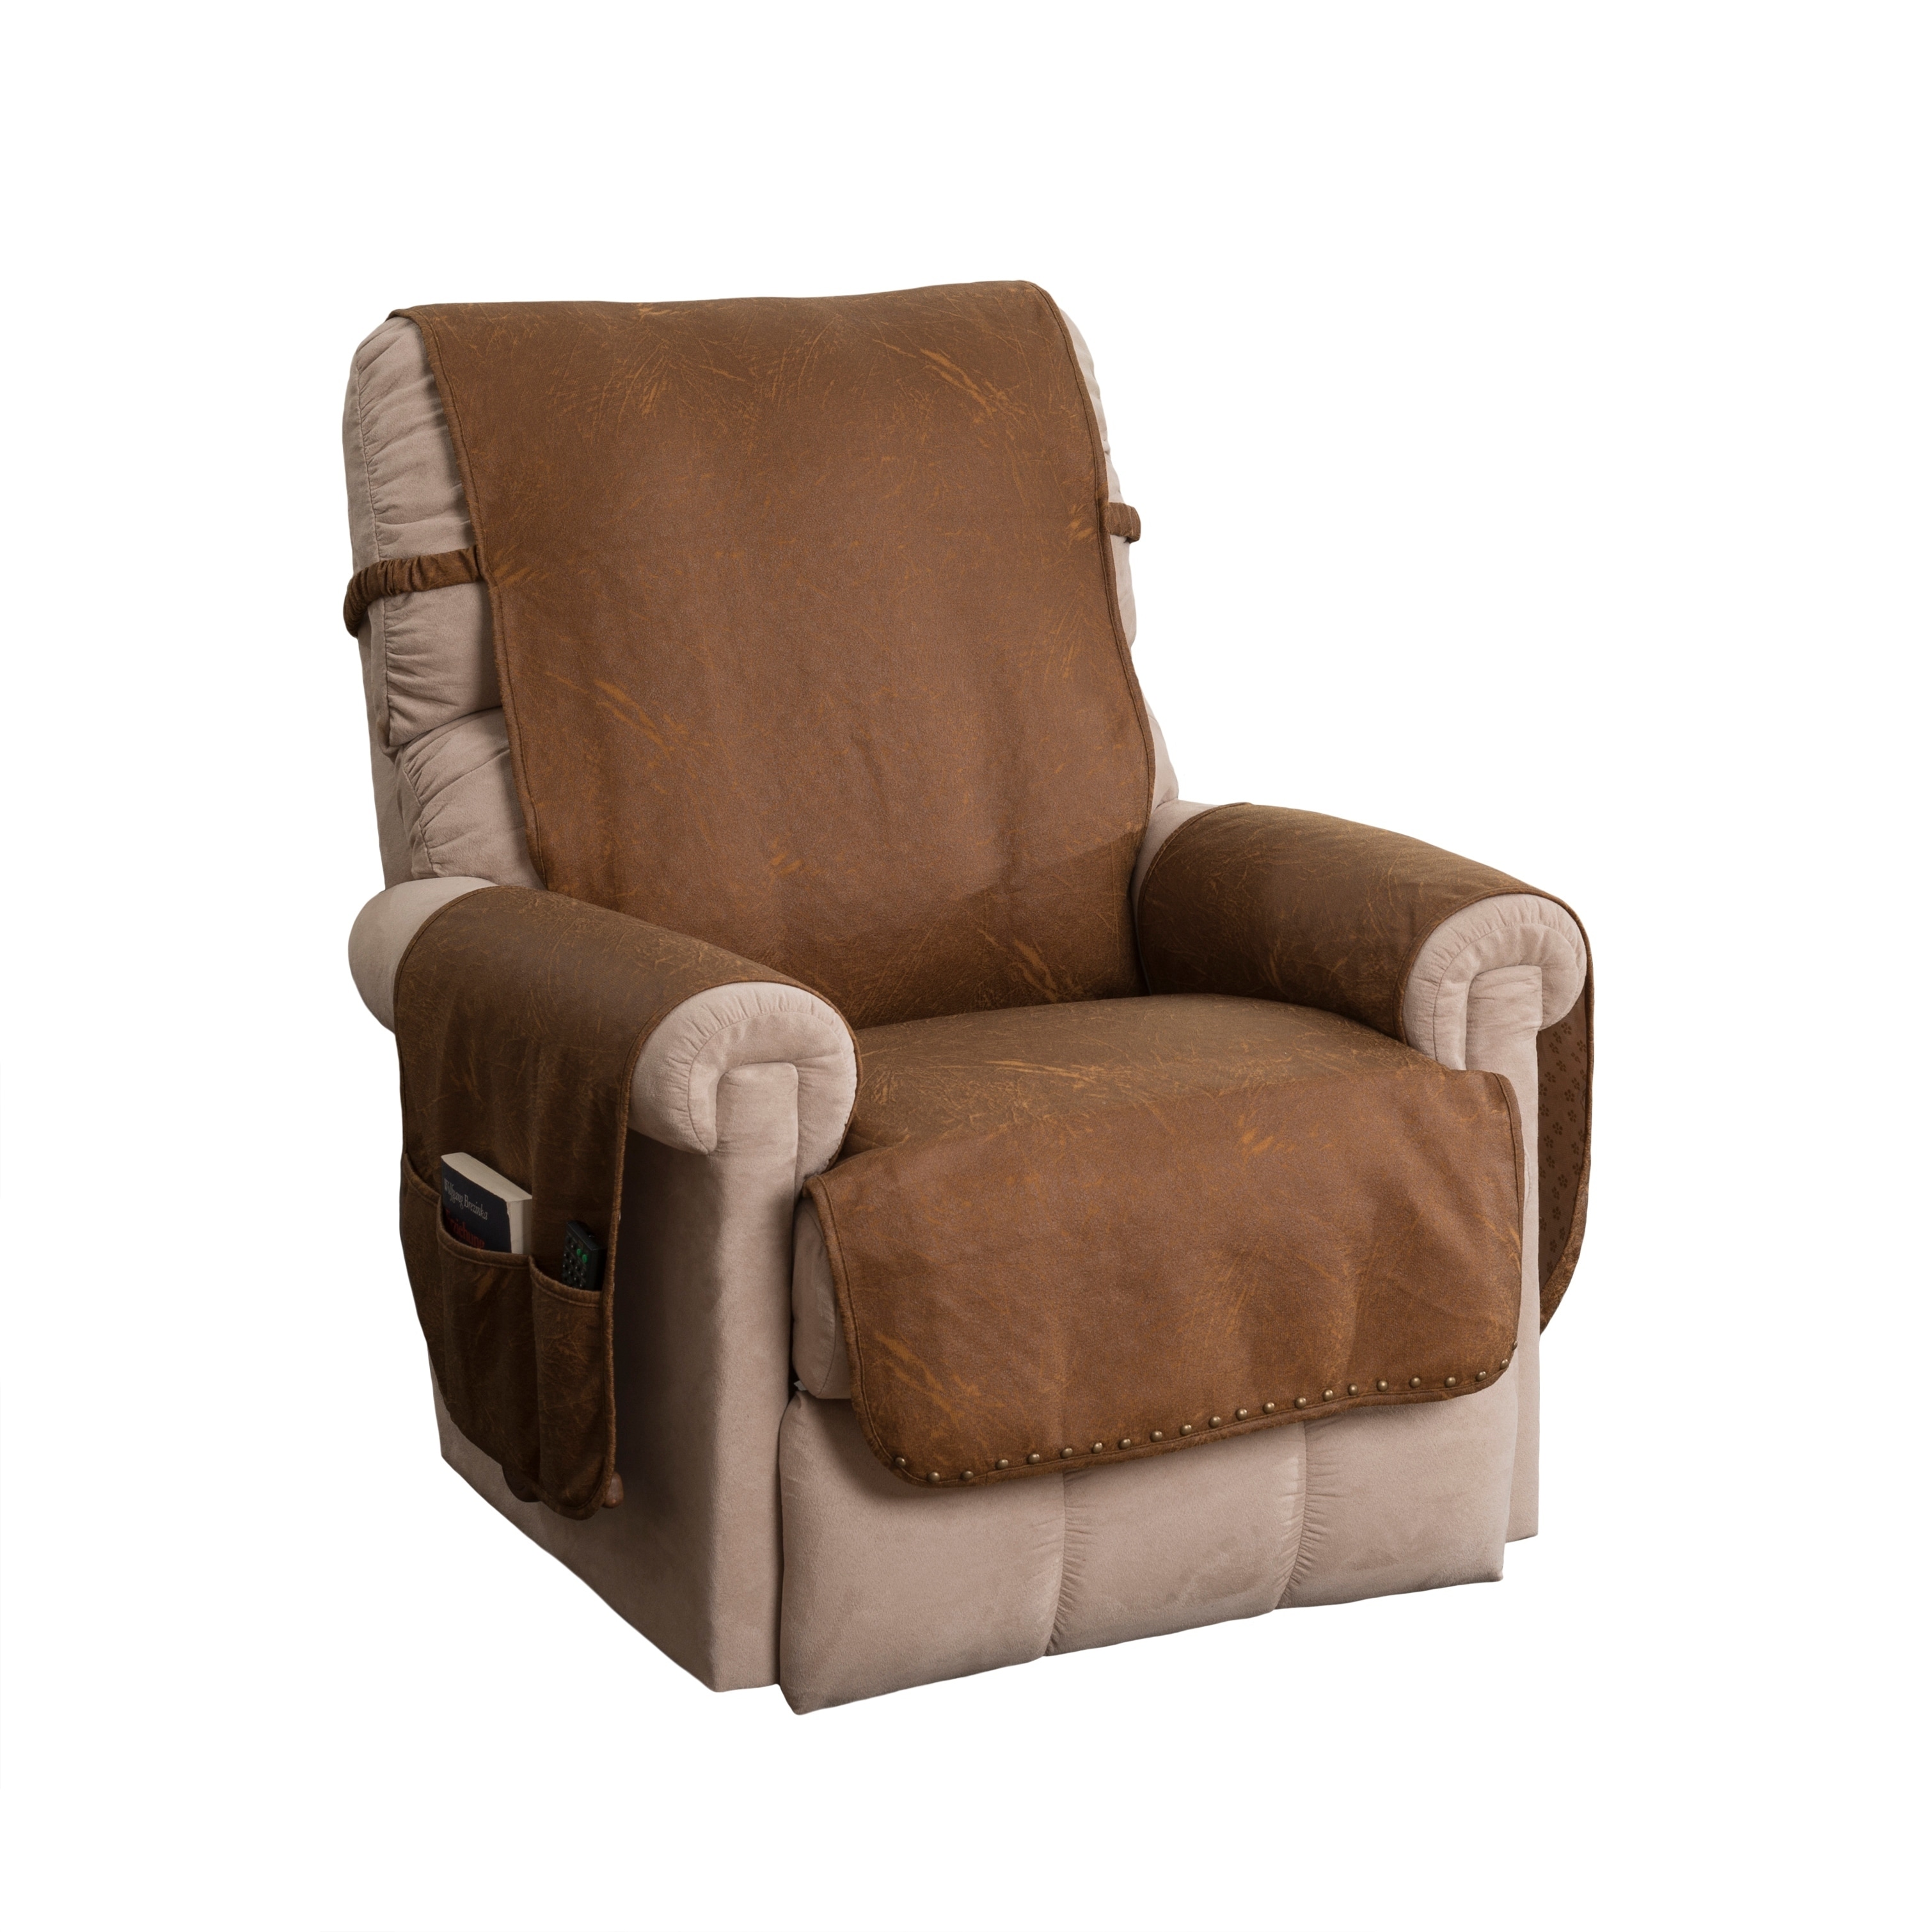 Shop Innovative Texile Solutions Faux Leather Recliner Slipcover